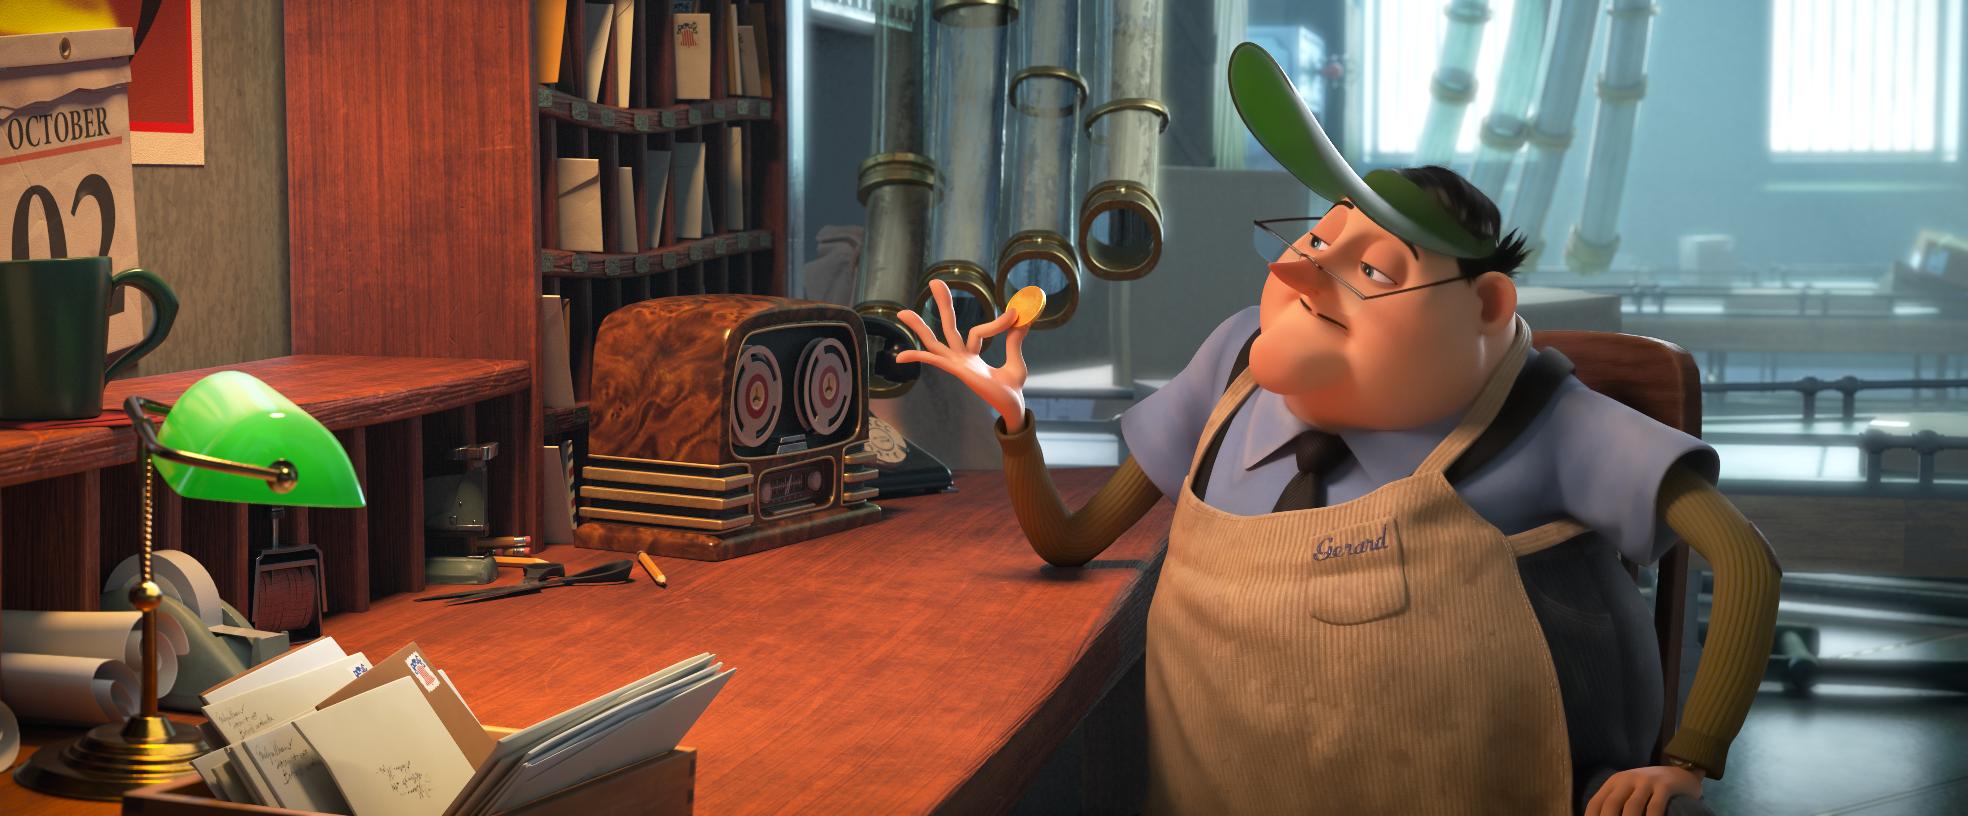 Making Magic With DreamWorks Animation’s ‘To: Gerard’